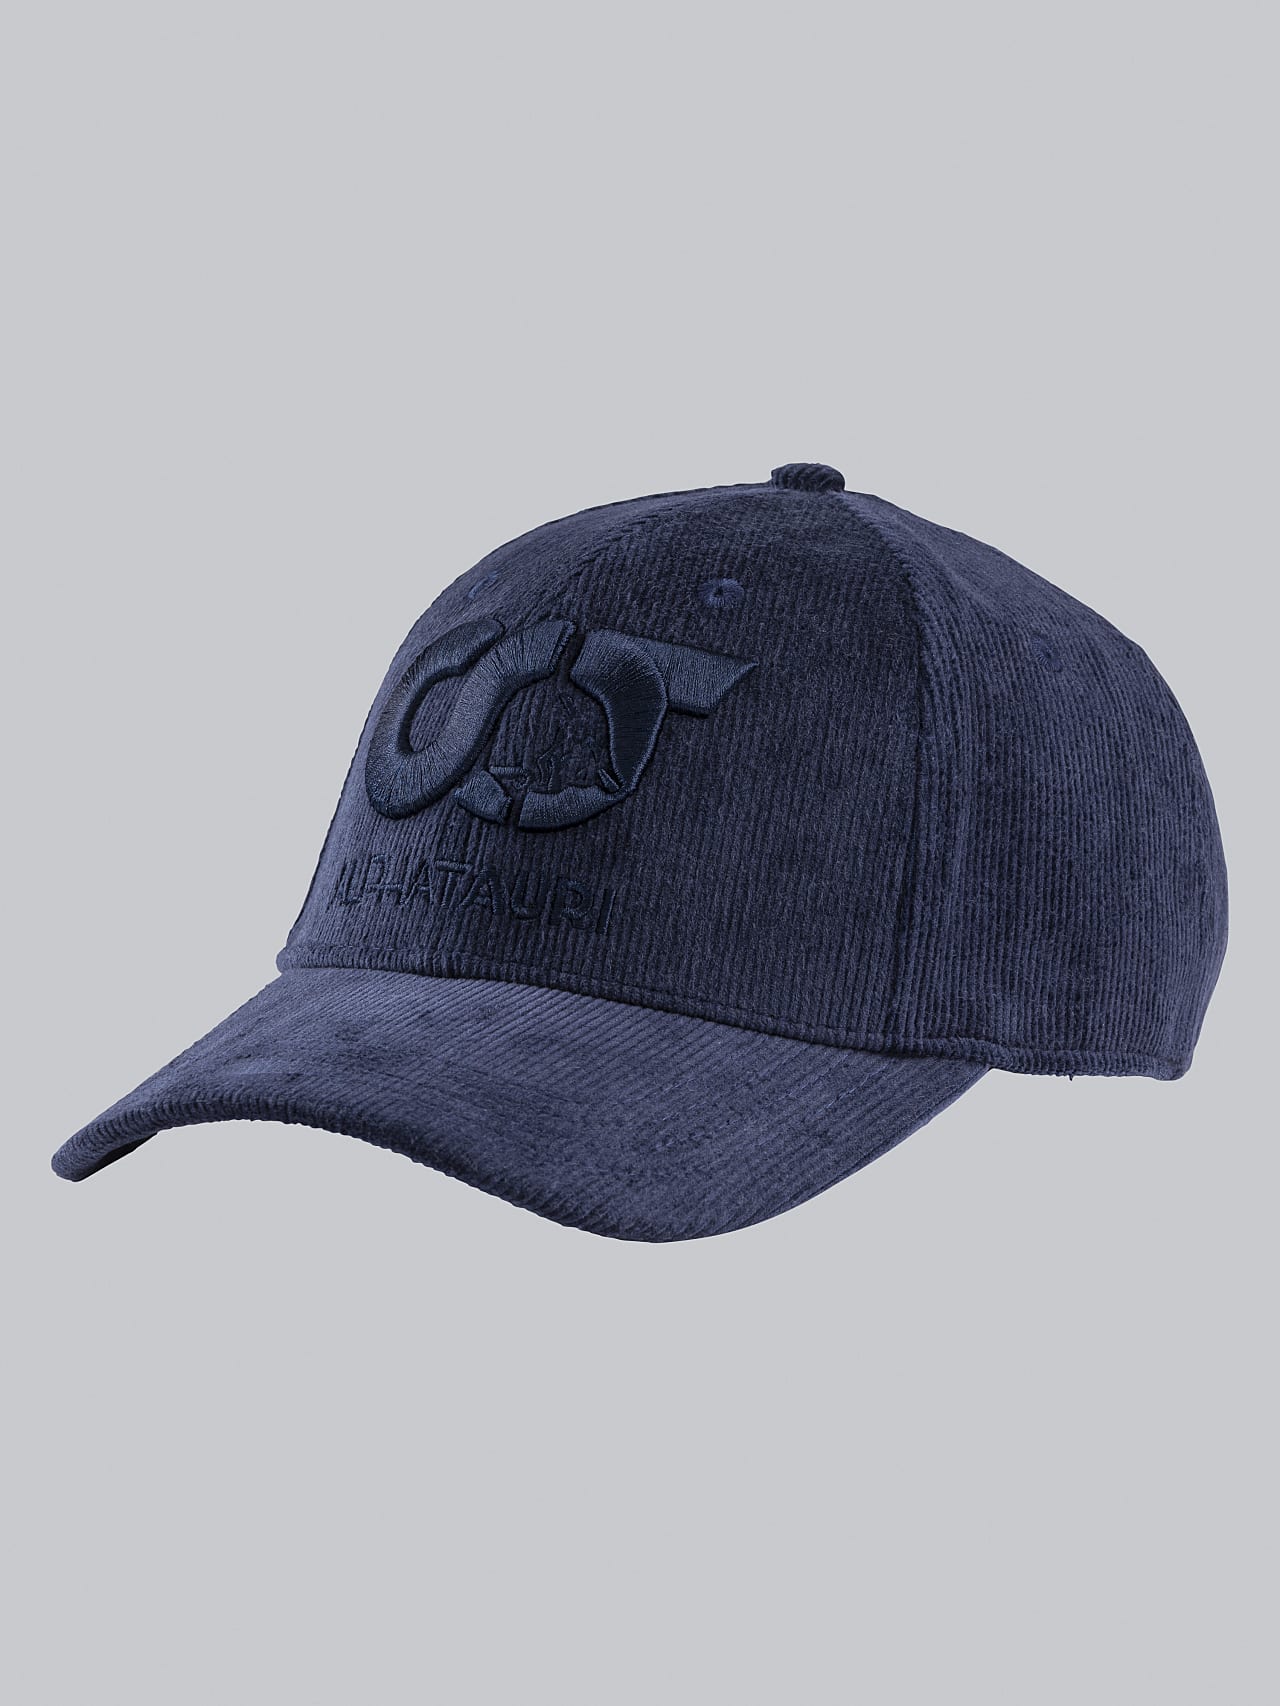 AlphaTauri | AMART V1.Y5.02 | Unisex Embroidered Cord Cap in navy for Unisex